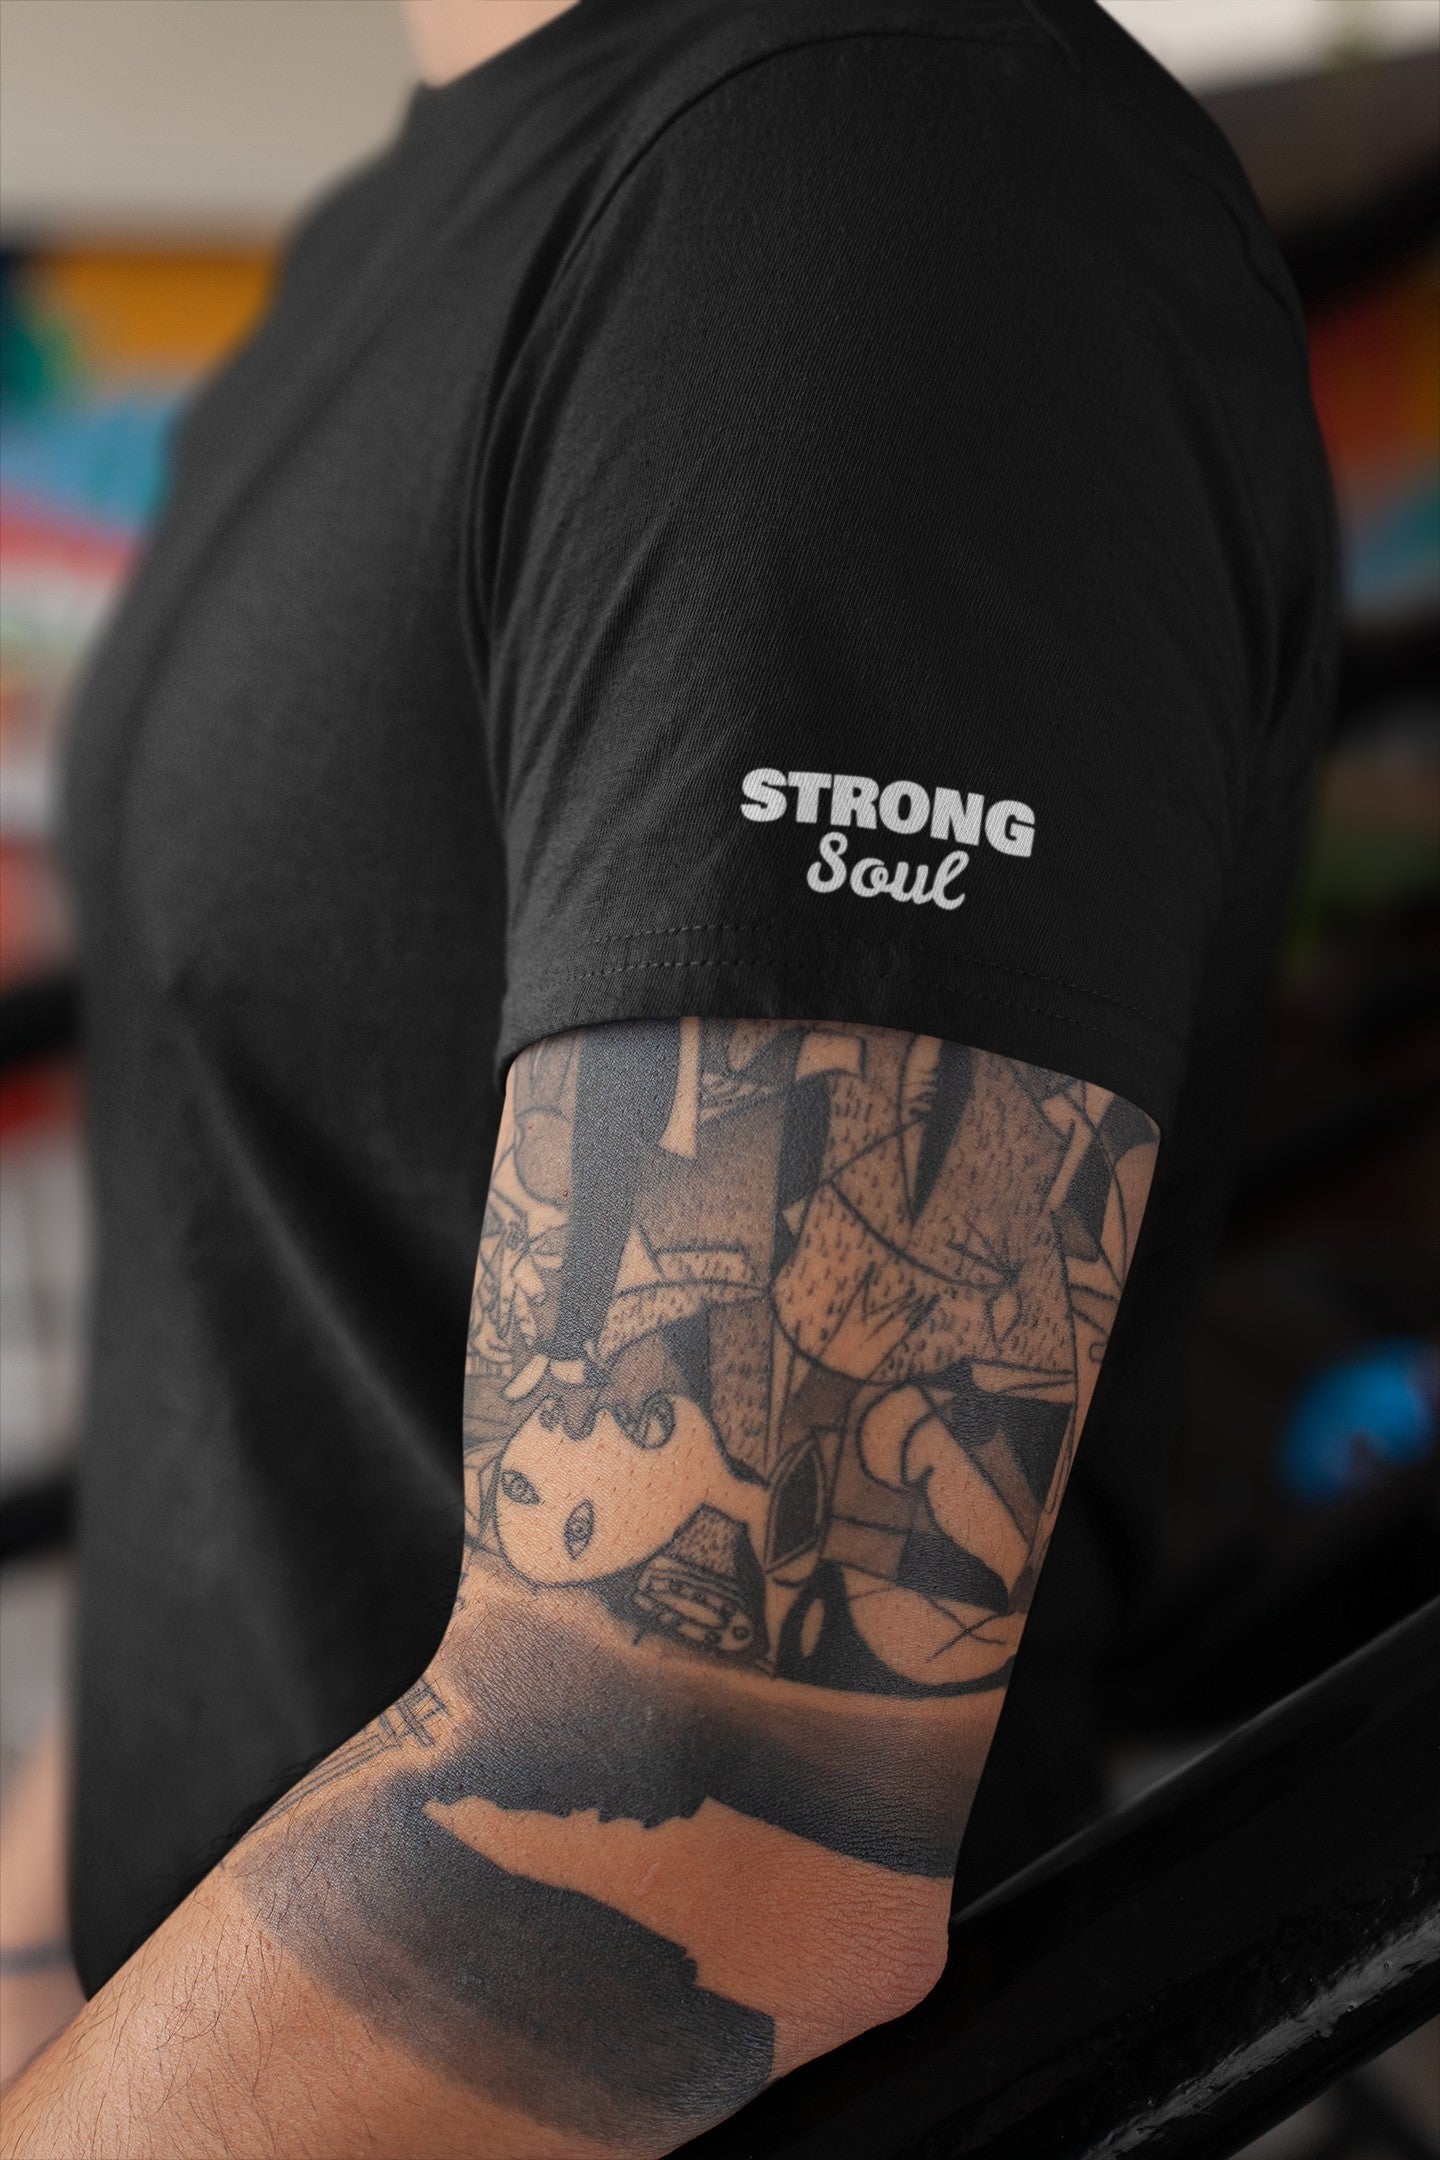 Gym T Shirt - Extraordinary with premium cotton Lycra. The Sports T Shirt by Strong Soul